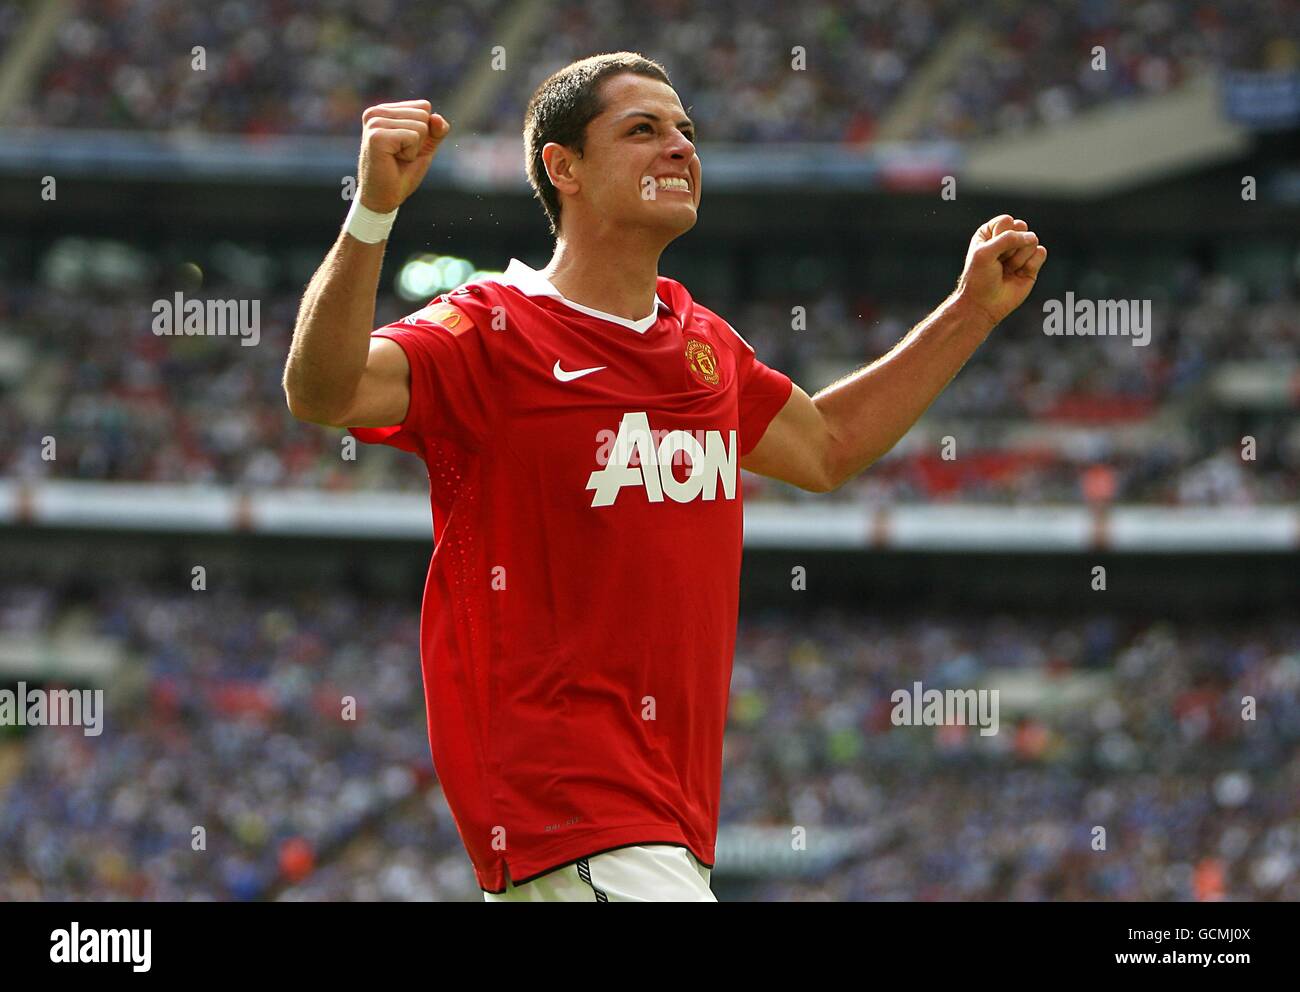 Soccer - FA Community Shield - Chelsea v Manchester United - Wembley Stadium. Manchester United's Javier Hernandez celebrates after scoring his sides second goal of the game Stock Photo